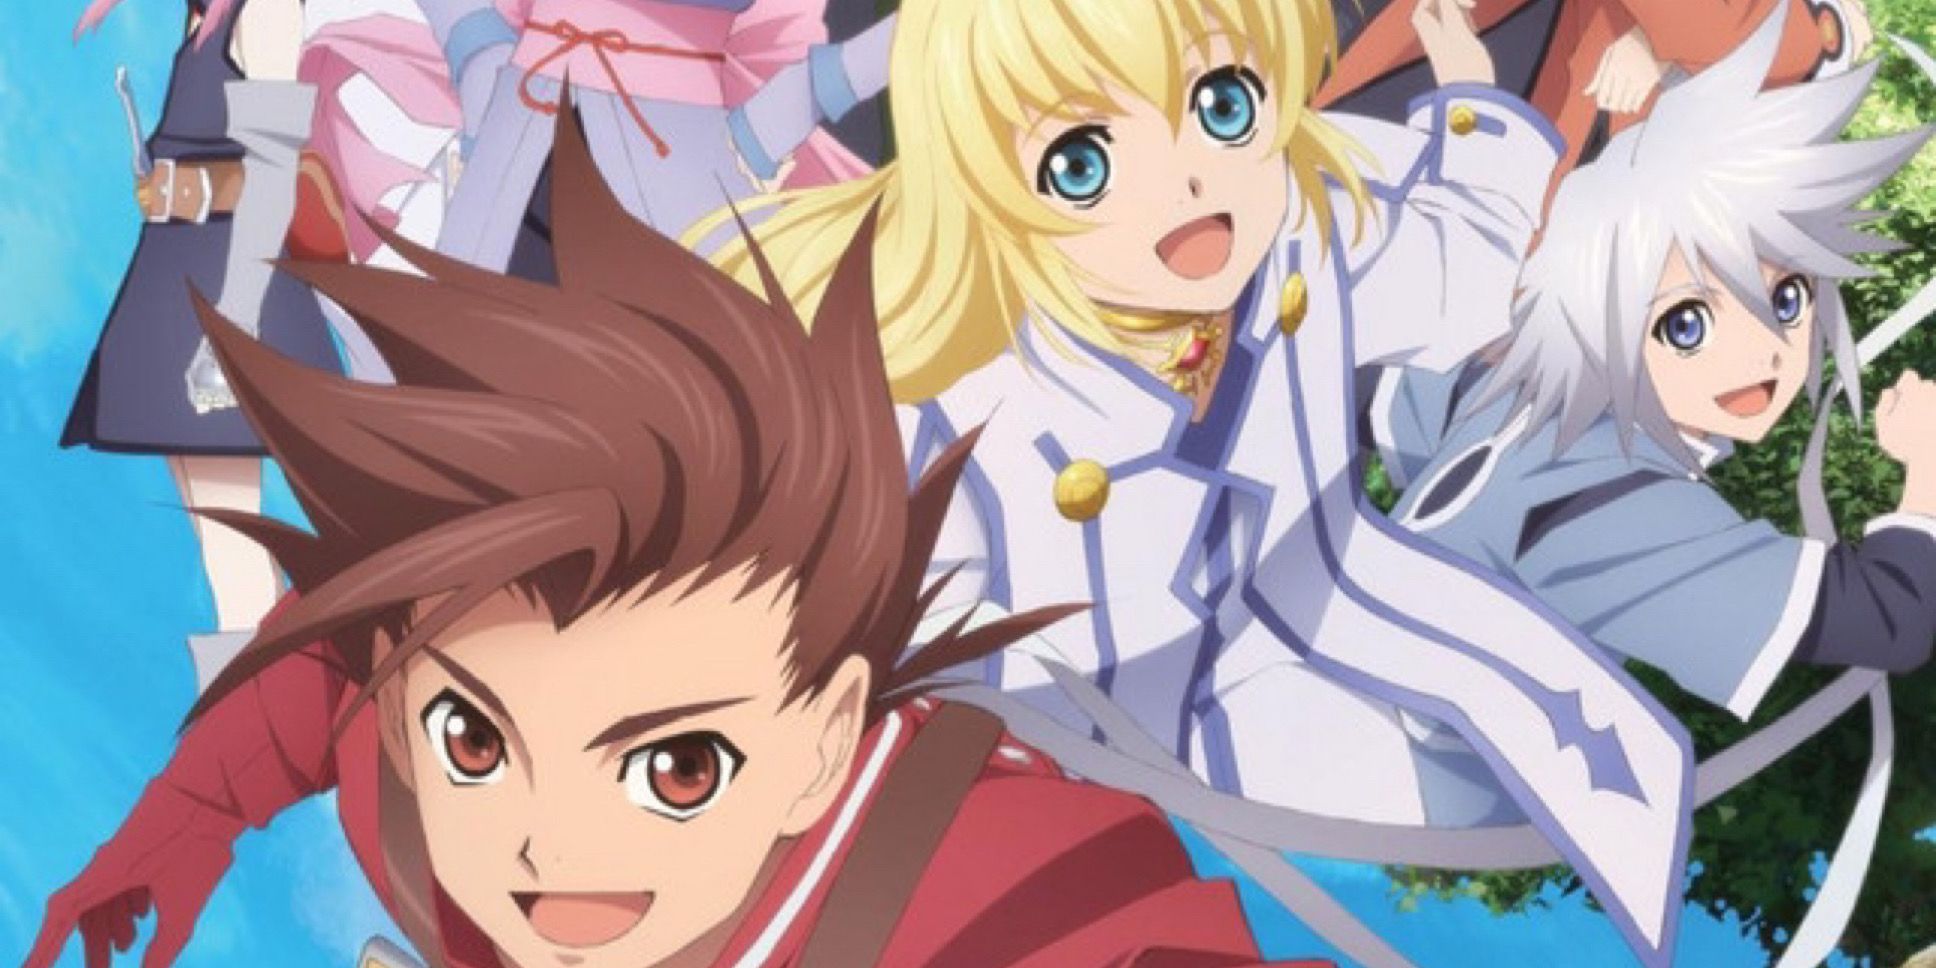 Main characters From Tales of Symphonia anime.